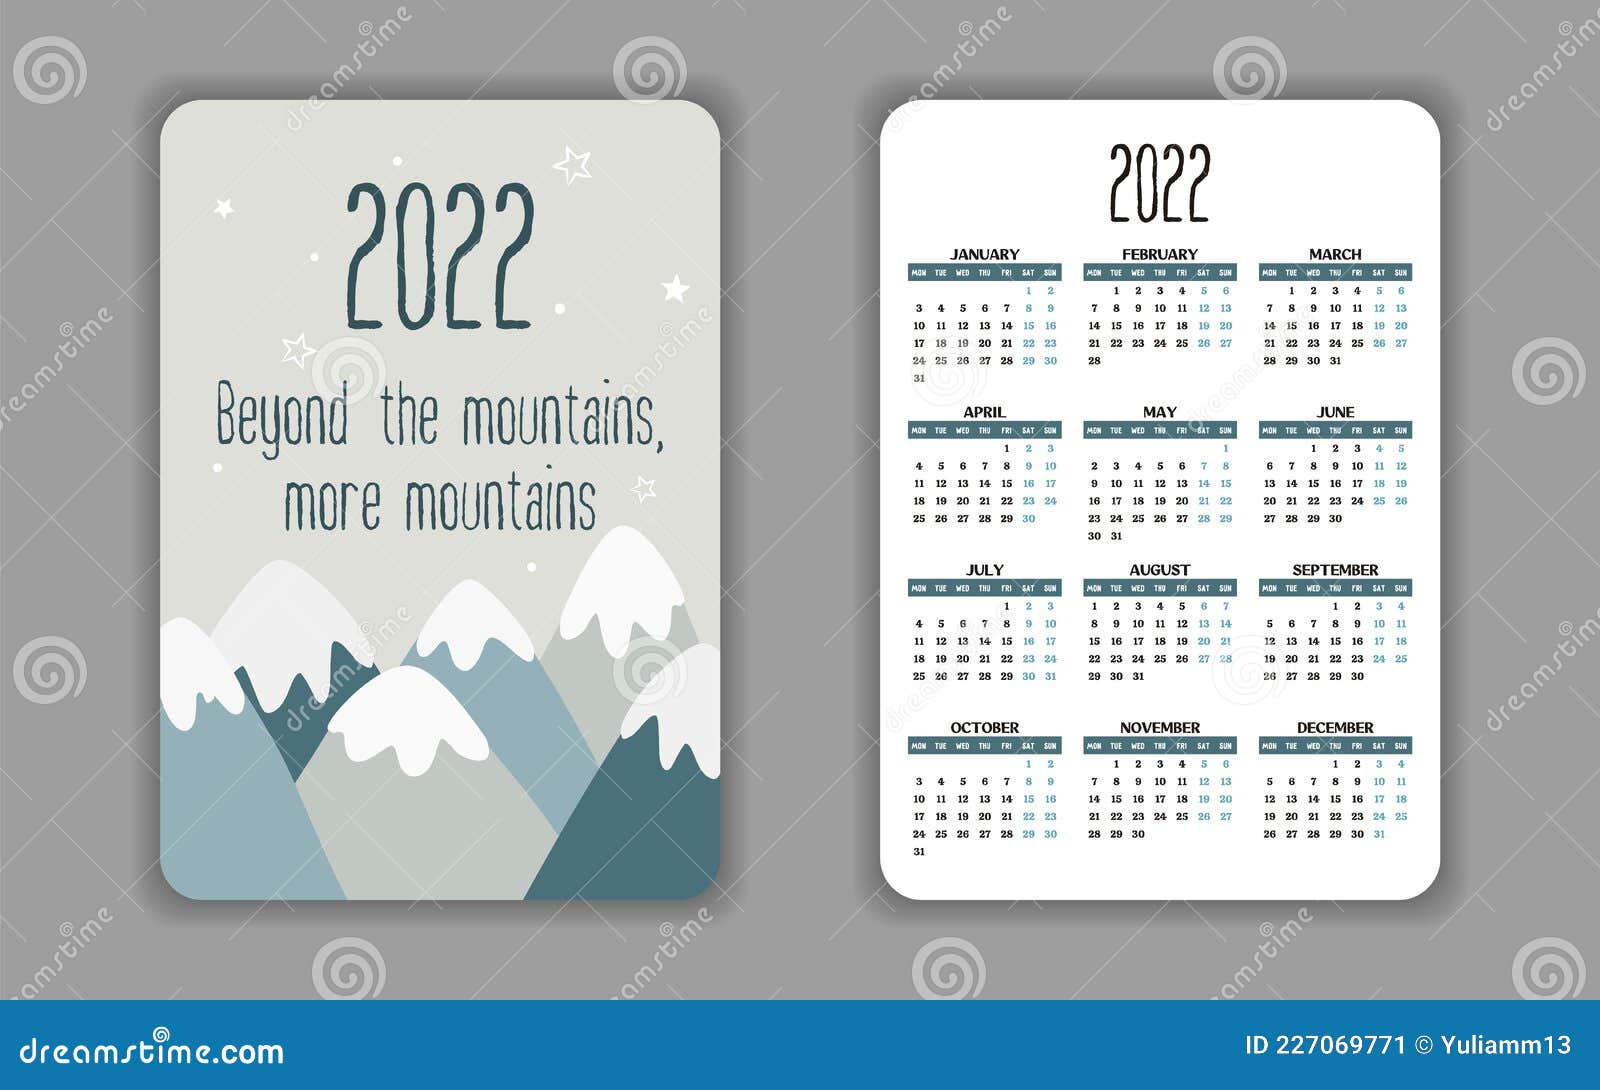 Free Printable Pocket Calendar 2022 2022 Pocket Calendar Template With Quote About Mountains Stock Vector -  Illustration Of Greeting, Mountains: 227069771